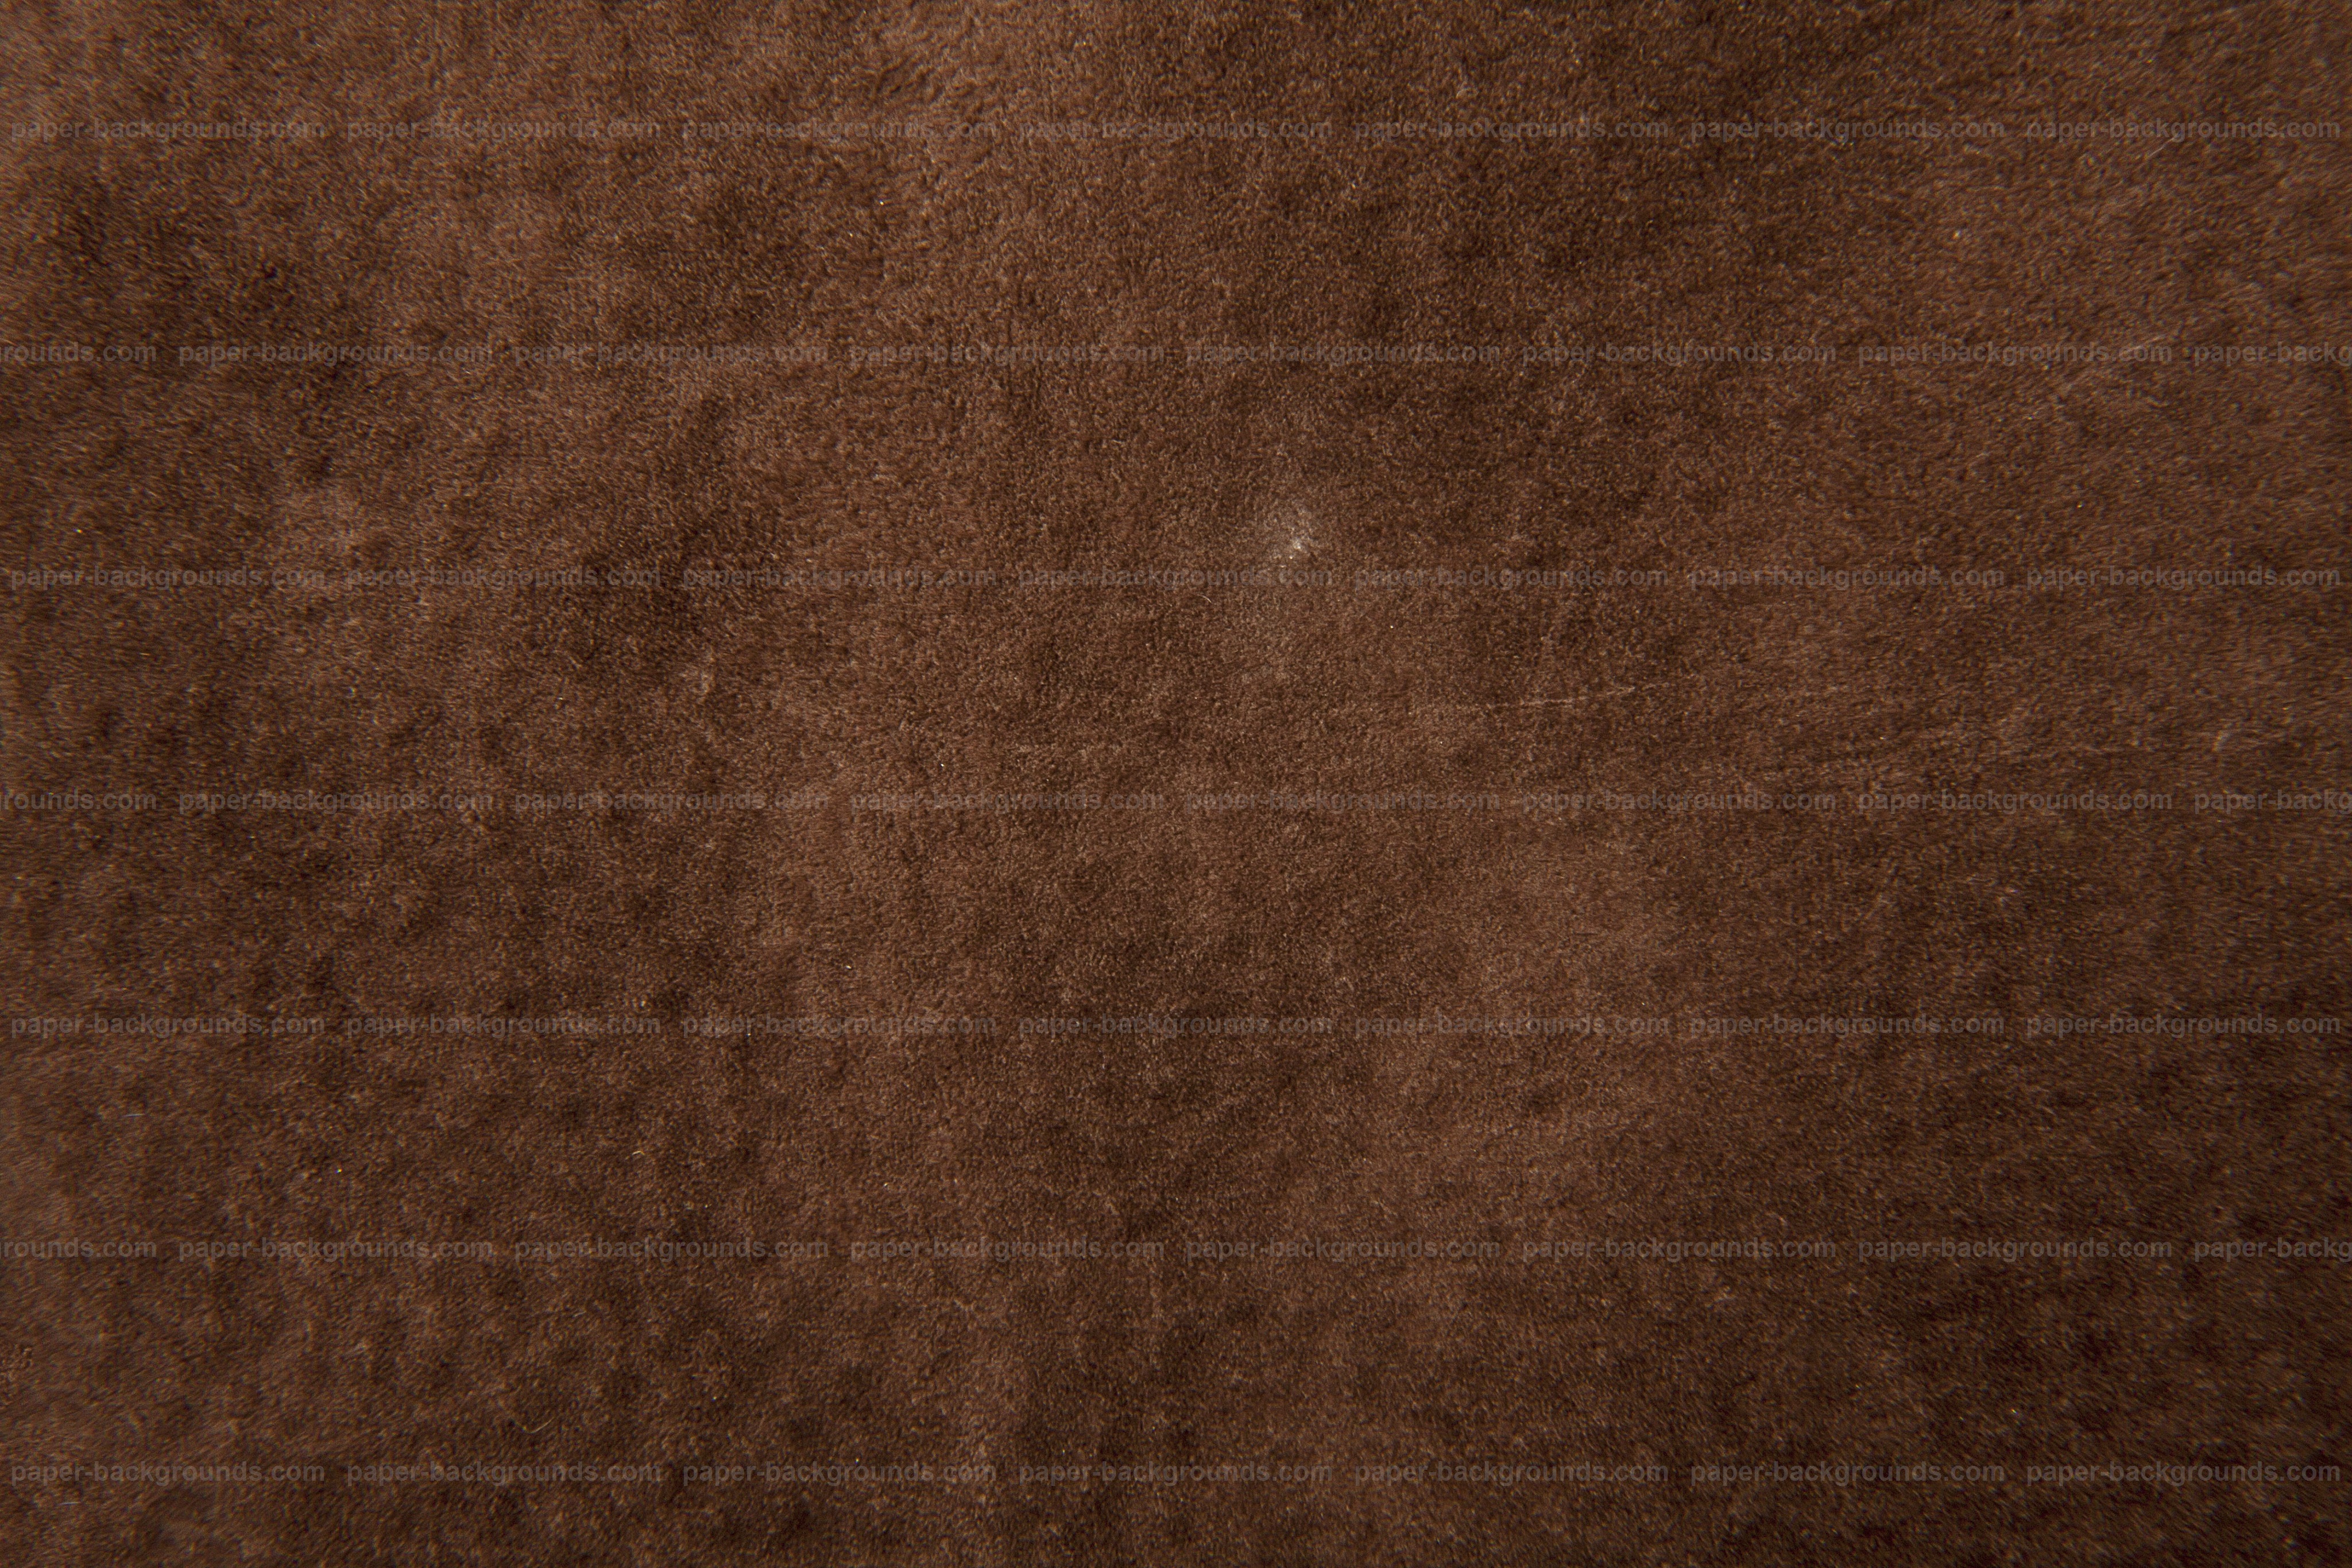 Paper Backgrounds | Dark Brown Vintage Soft Leather Texture